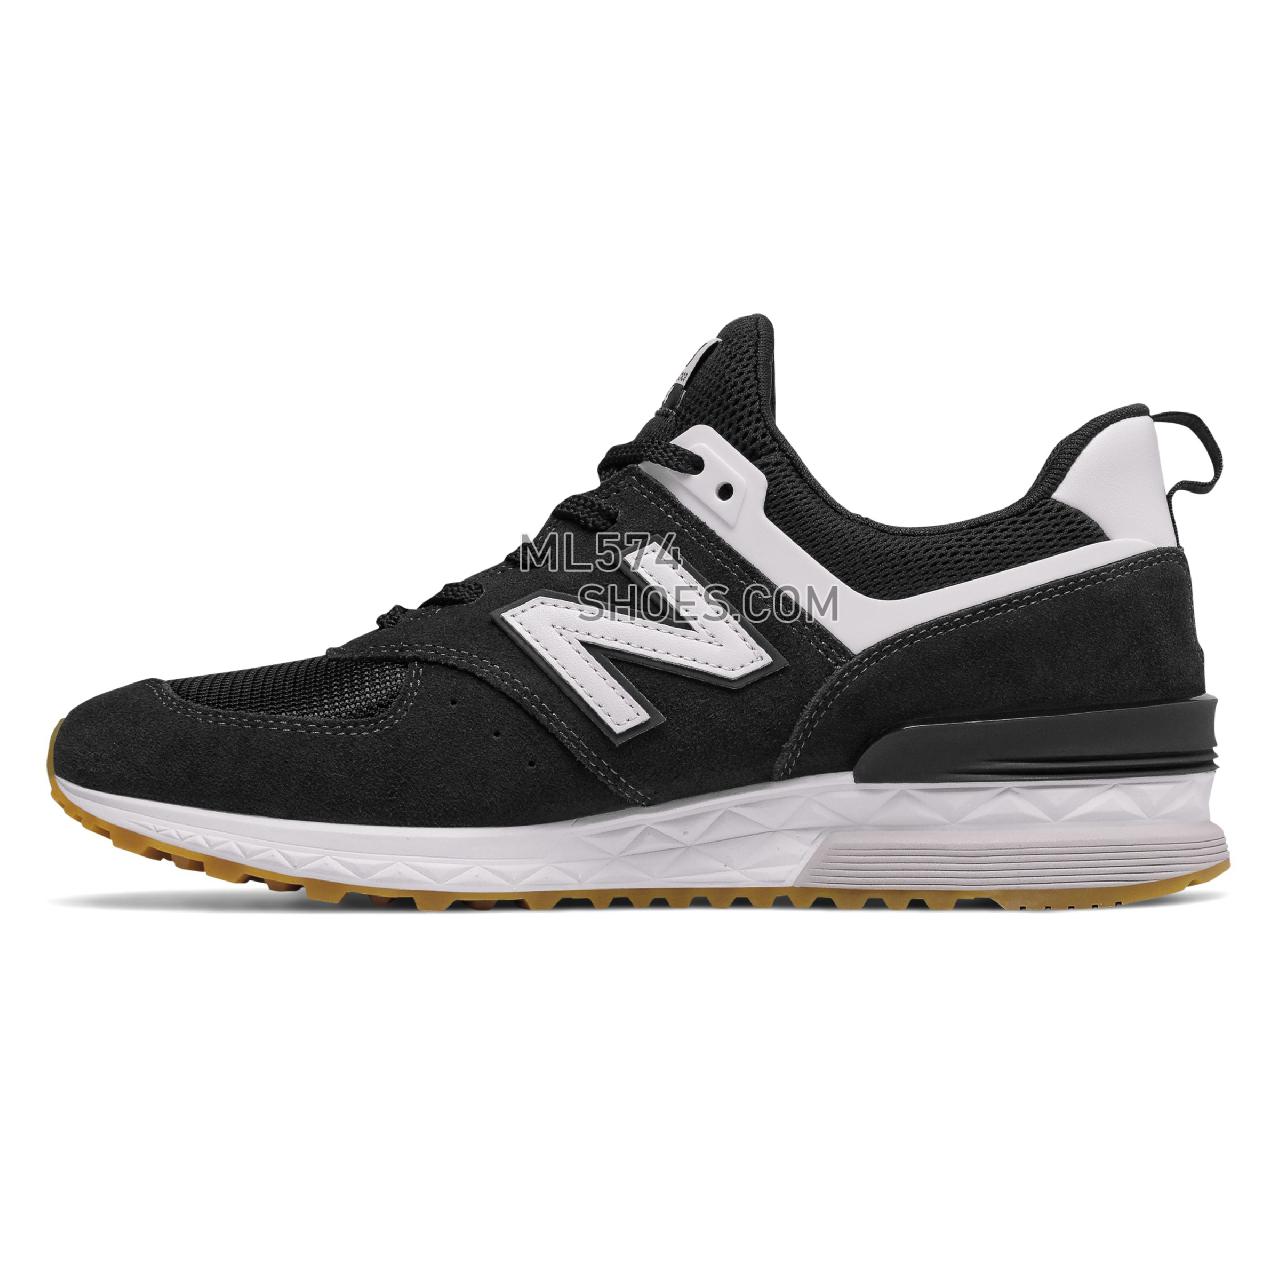 New Balance 574 Sport - Men's 574 - Classic Black with White - MS574FCB